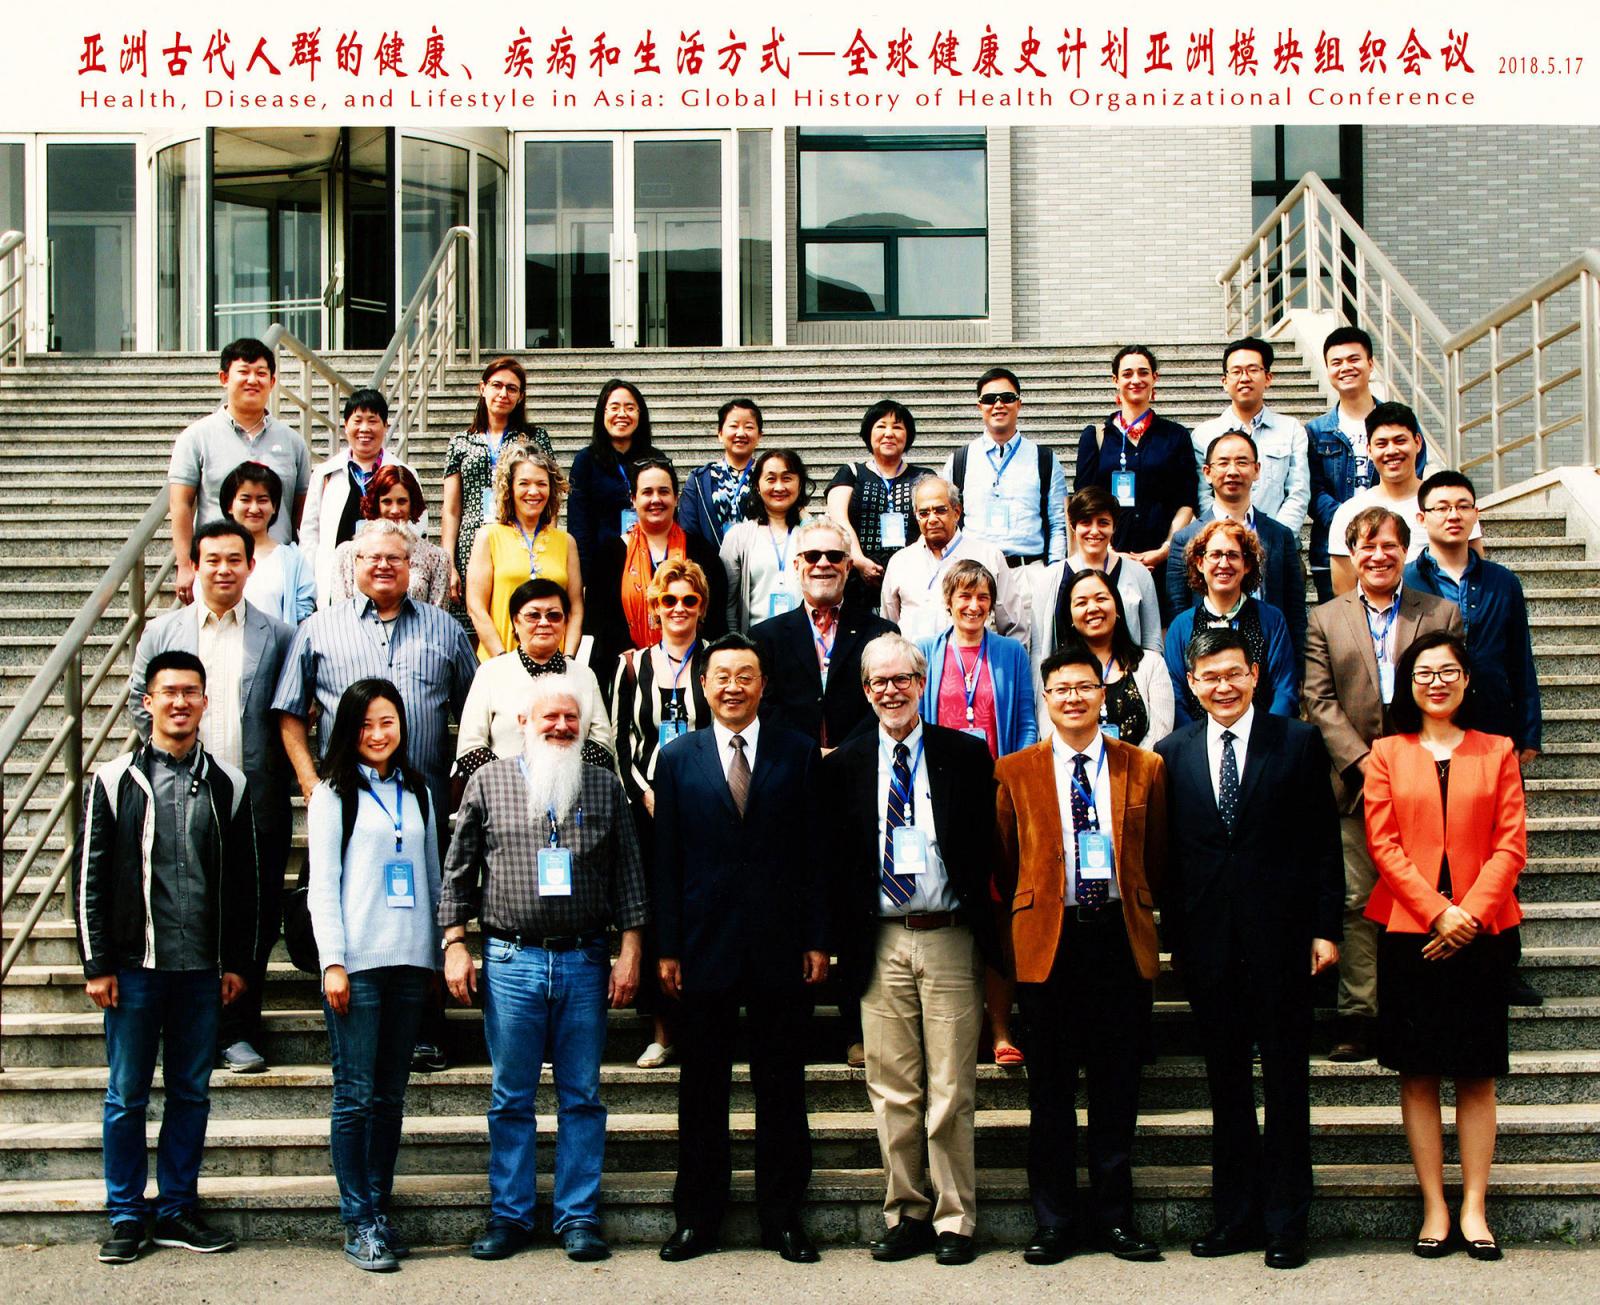 Zuckerman travels to China for Global History of Health conference